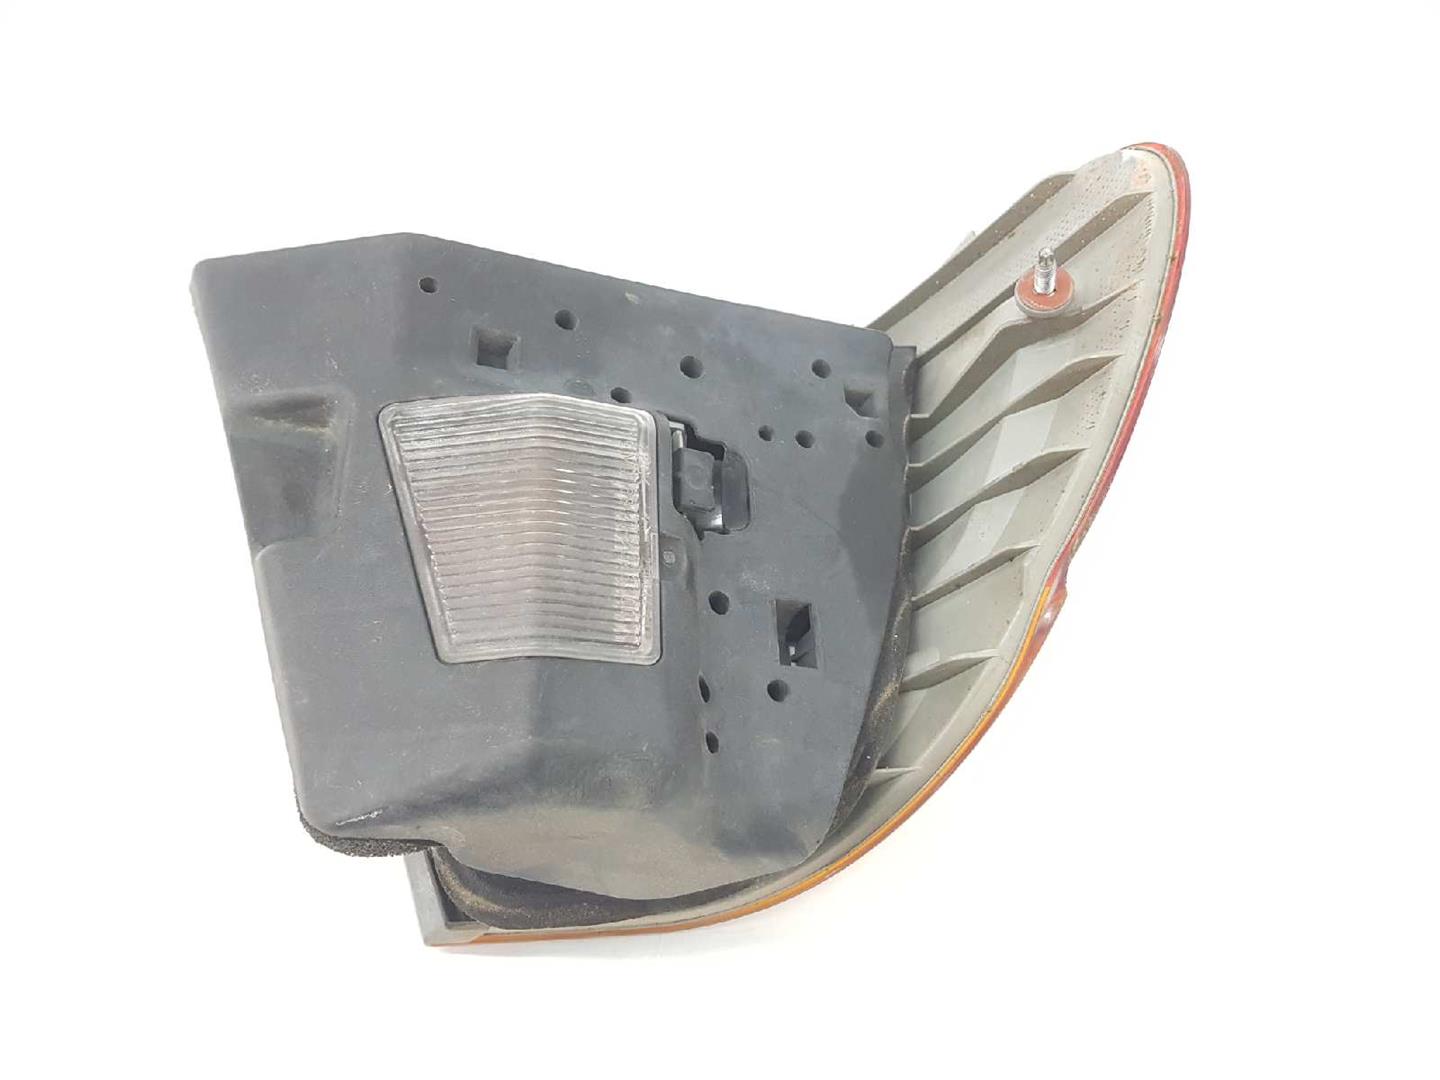 BMW 3 Series E46 (1997-2006) Rear Right Taillight Lamp 63218364922, 8364922, 230012 19915394